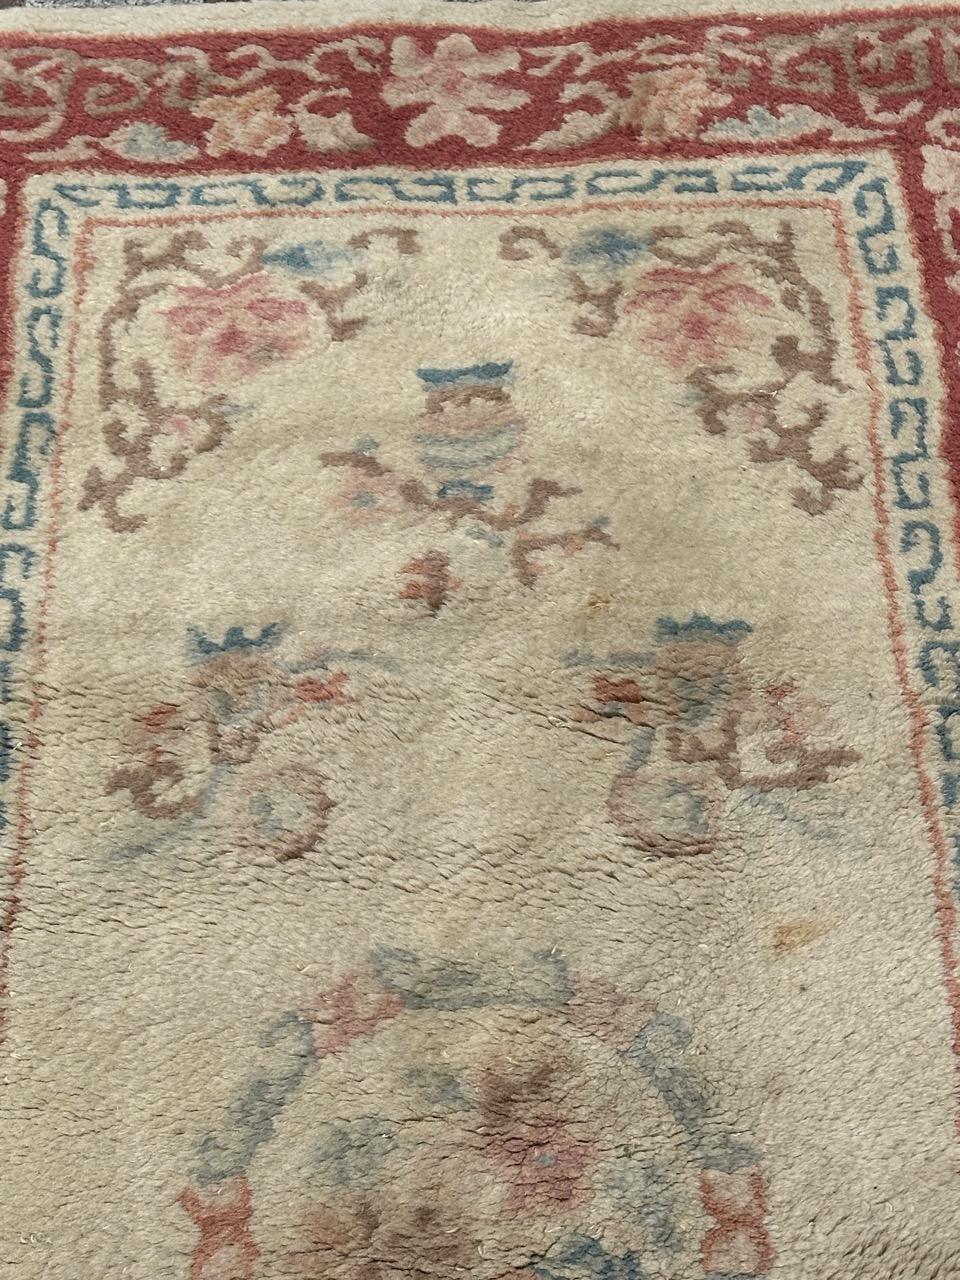 Wool Pretty vintage Chinese hand tufted rug For Sale